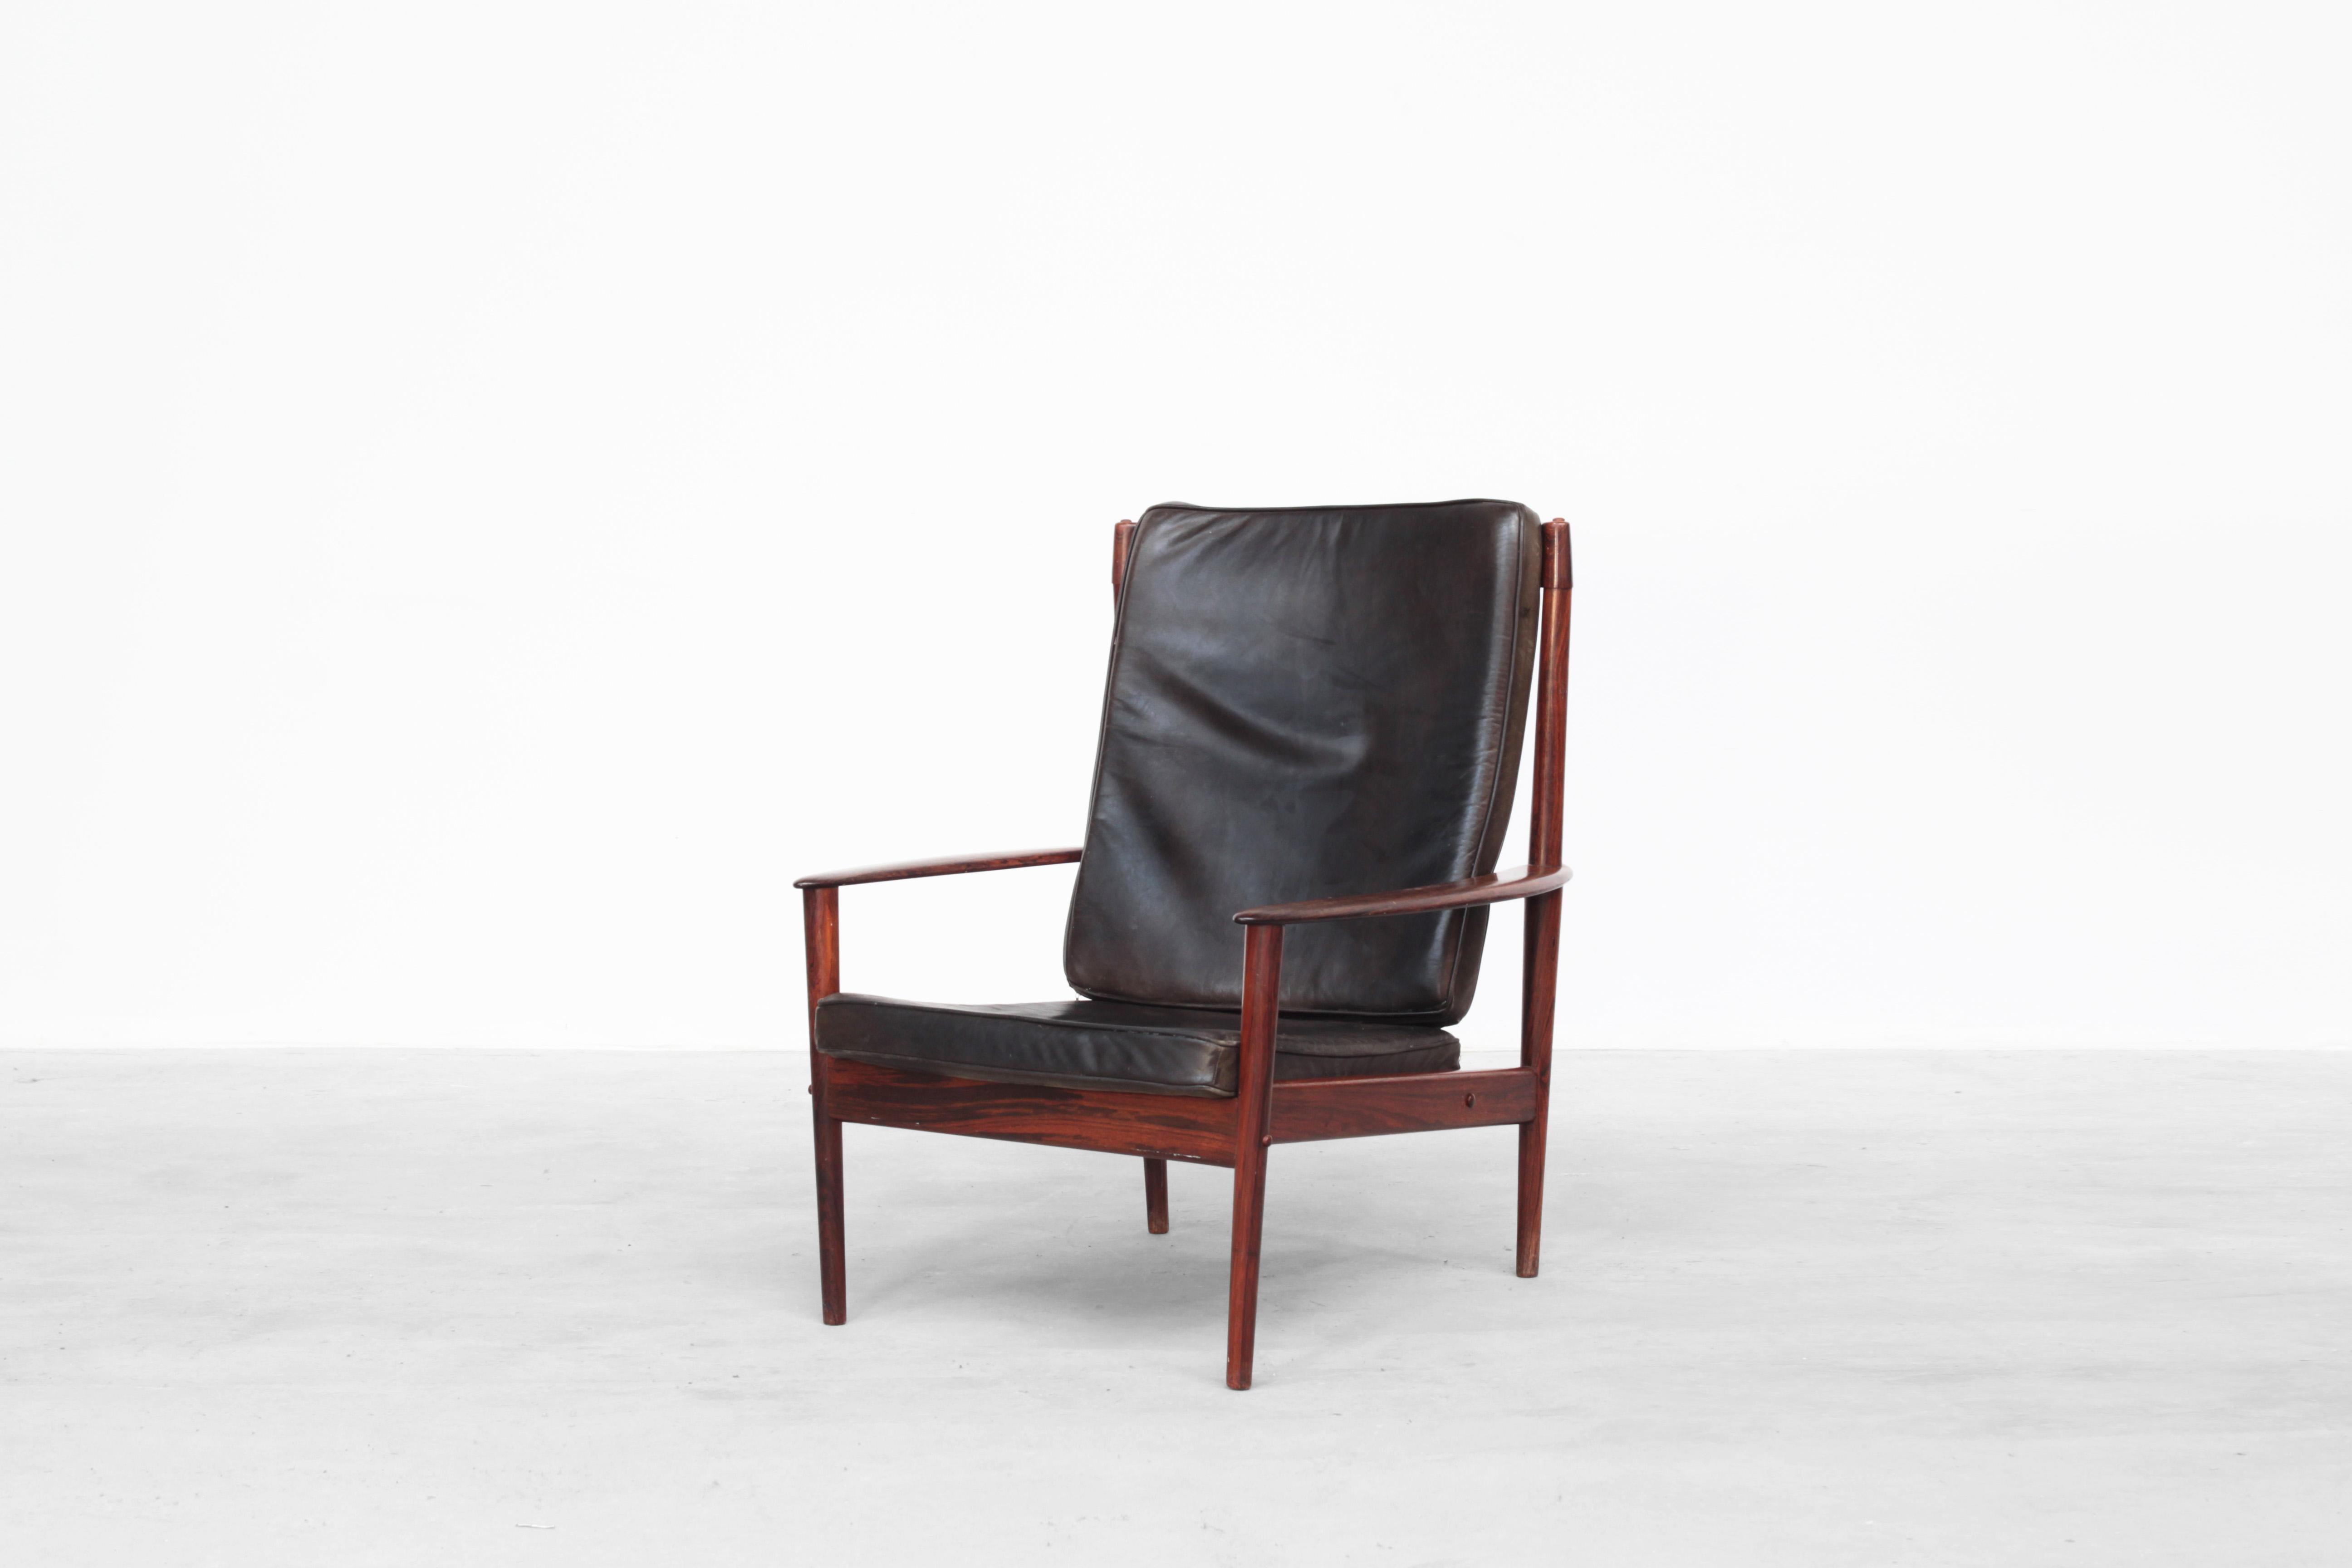 A beautiful easy chair designed by Grete Jalk and produced by P. Jeppesen in the 1960s. The chair is in great condition with just little traces of usage. The cushions are covered with brown patinated leather. The frame is made out of dark wood and a